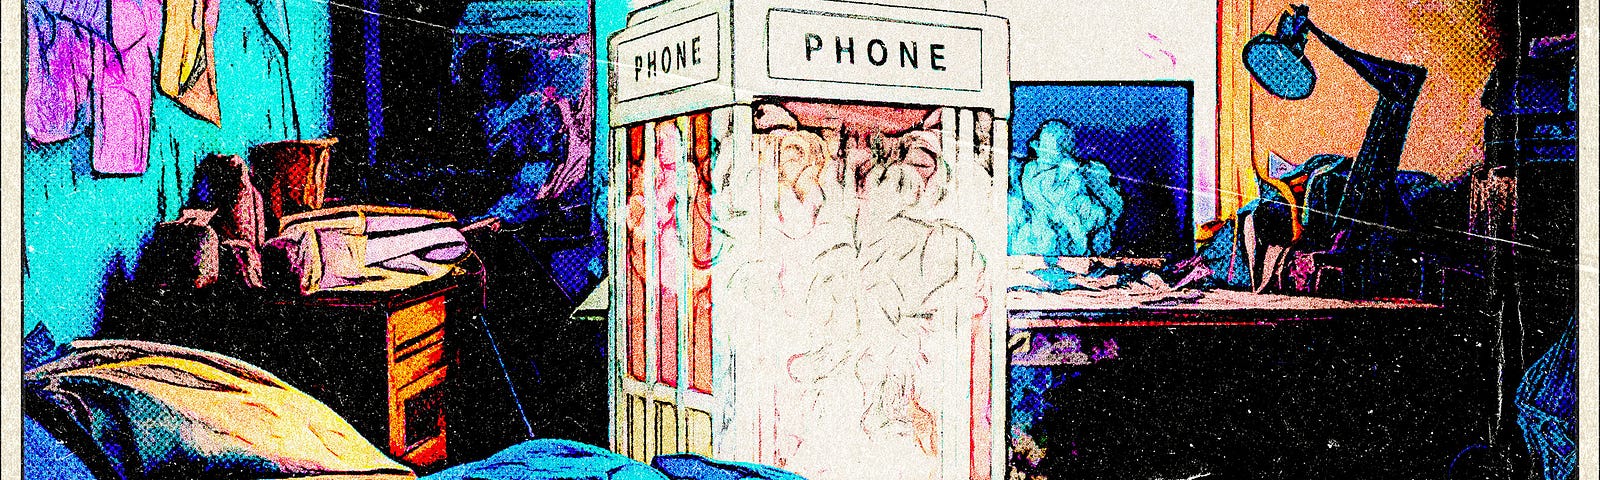 Phone booth in bedroom with weed smoke bellowing out